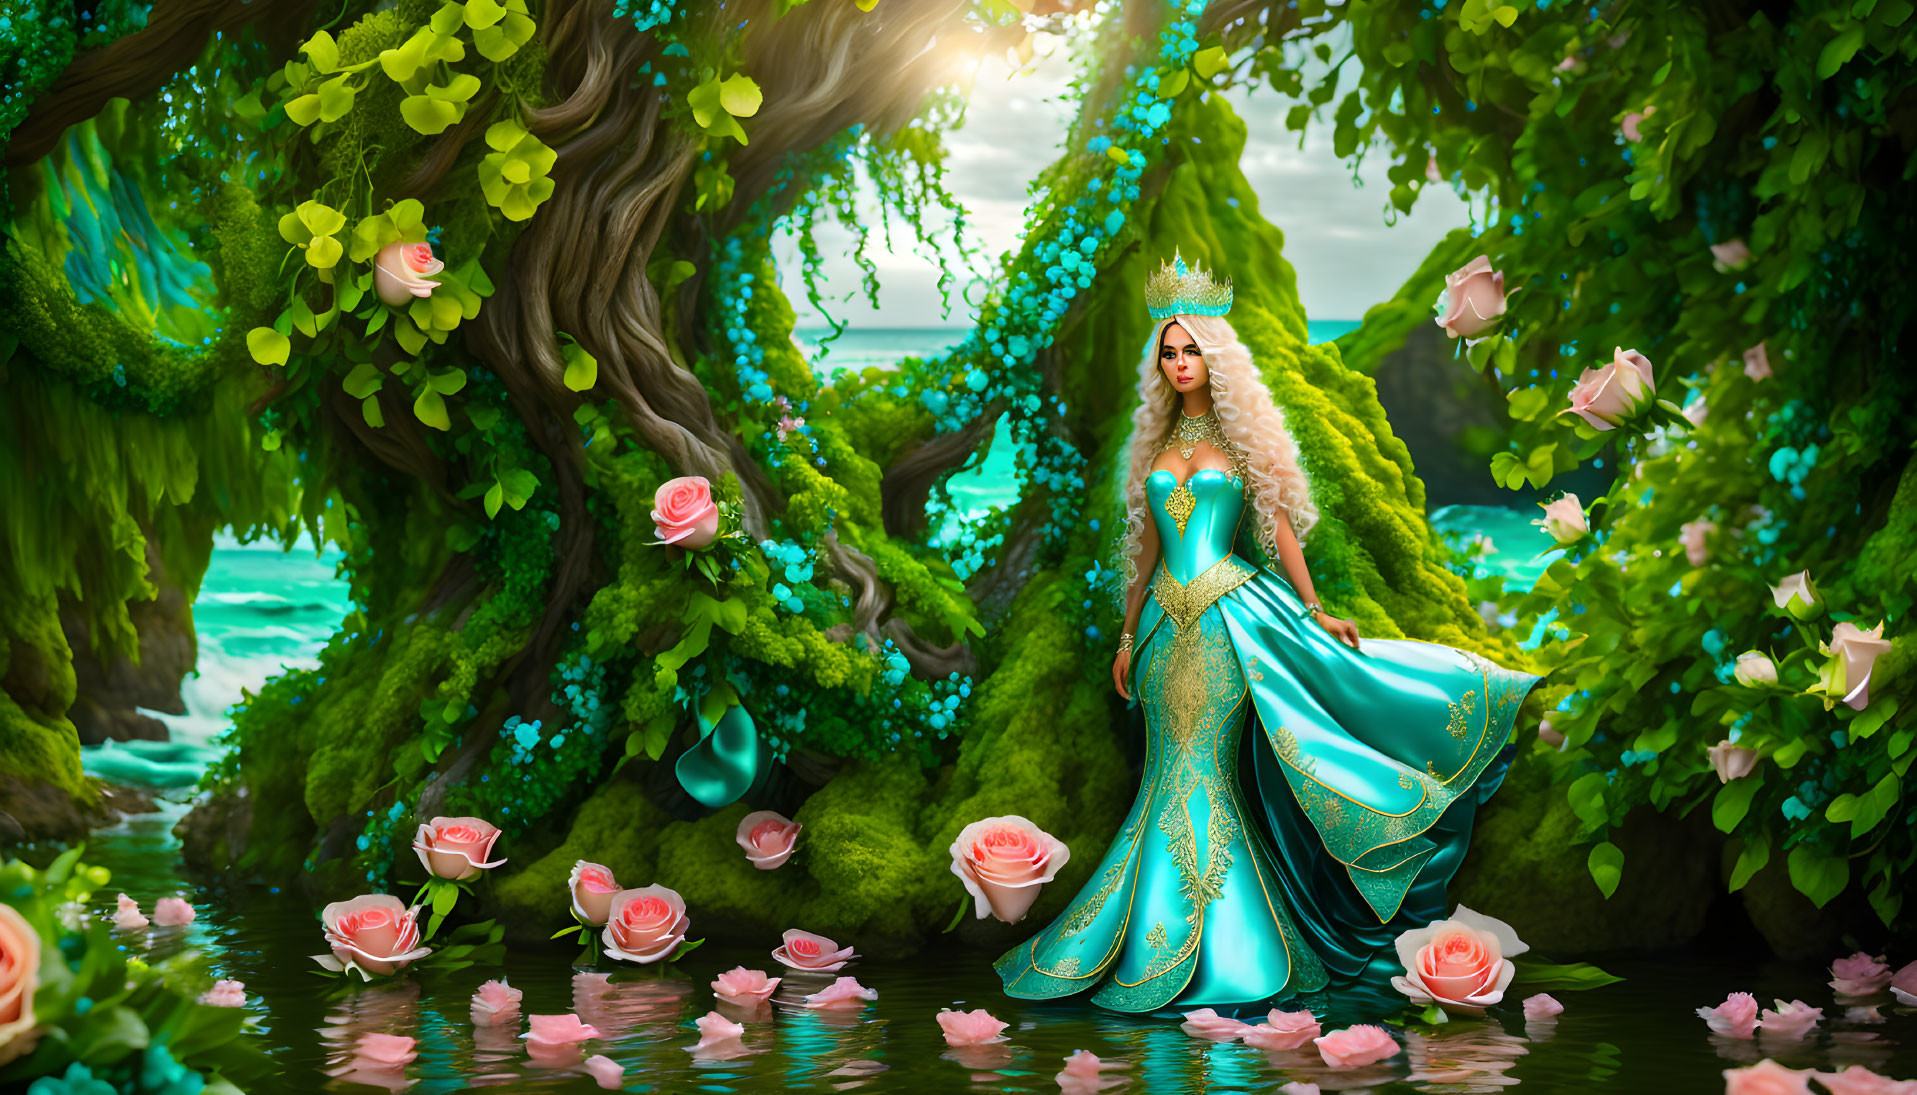 Elaborate Turquoise Gown Woman in Magical Forest